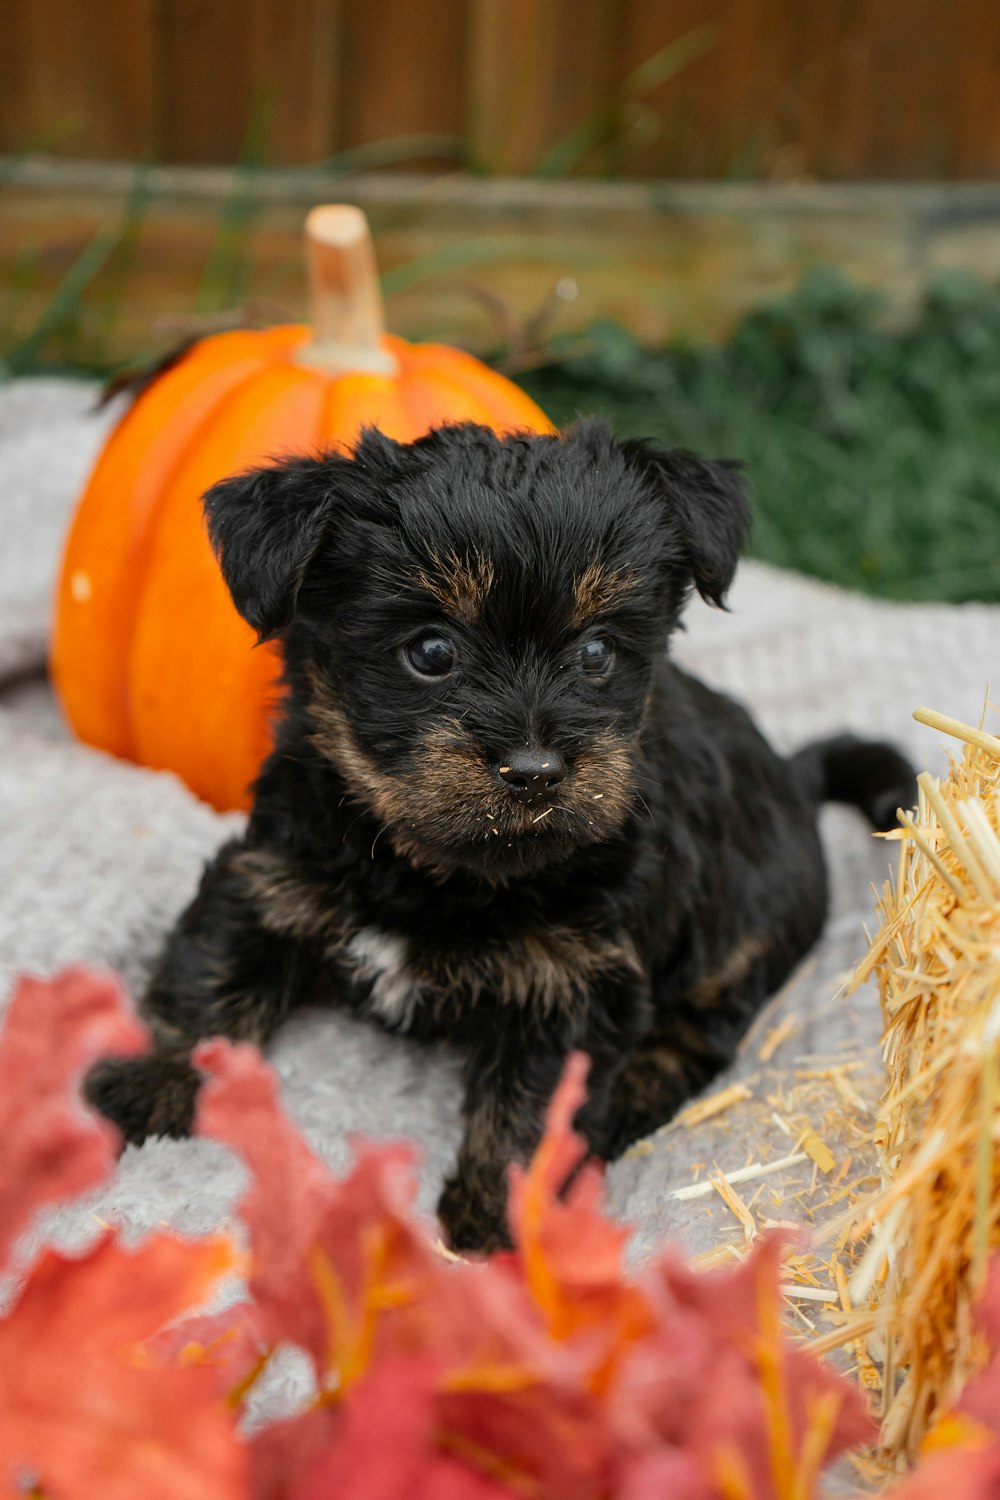 a small black and brown dog sitting next to a pile of hay